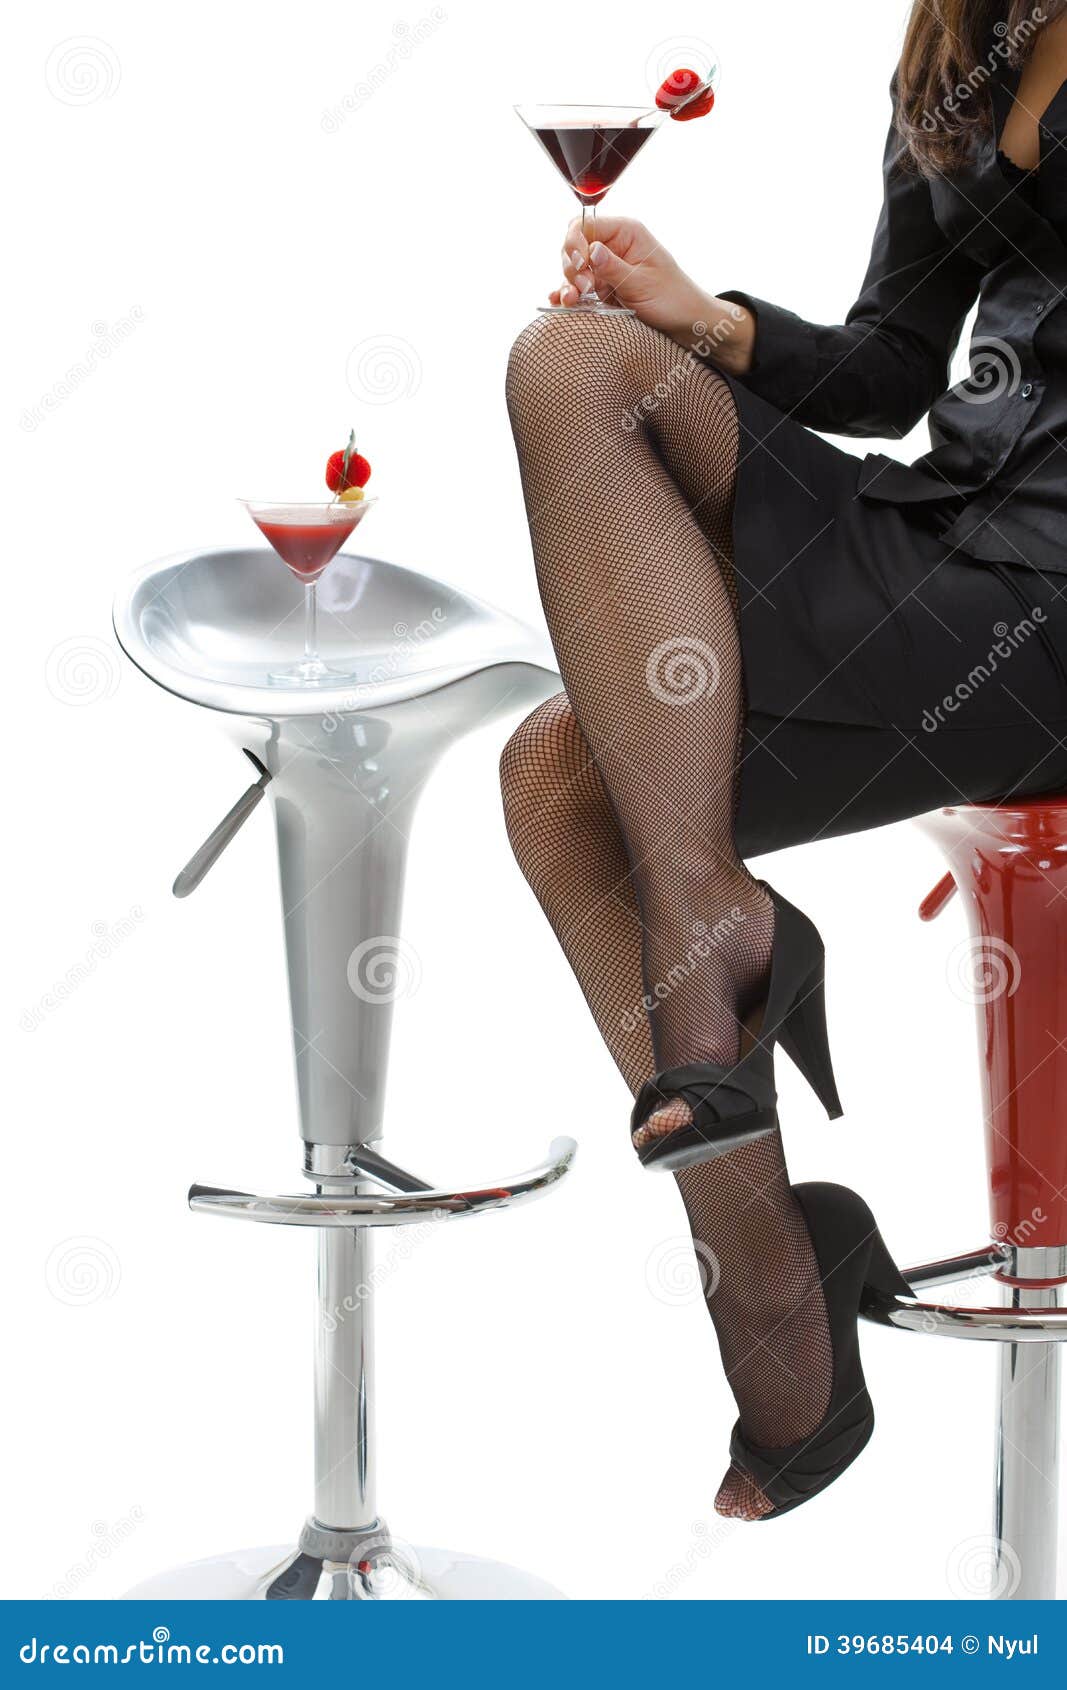 Hose and heels pose for drinks